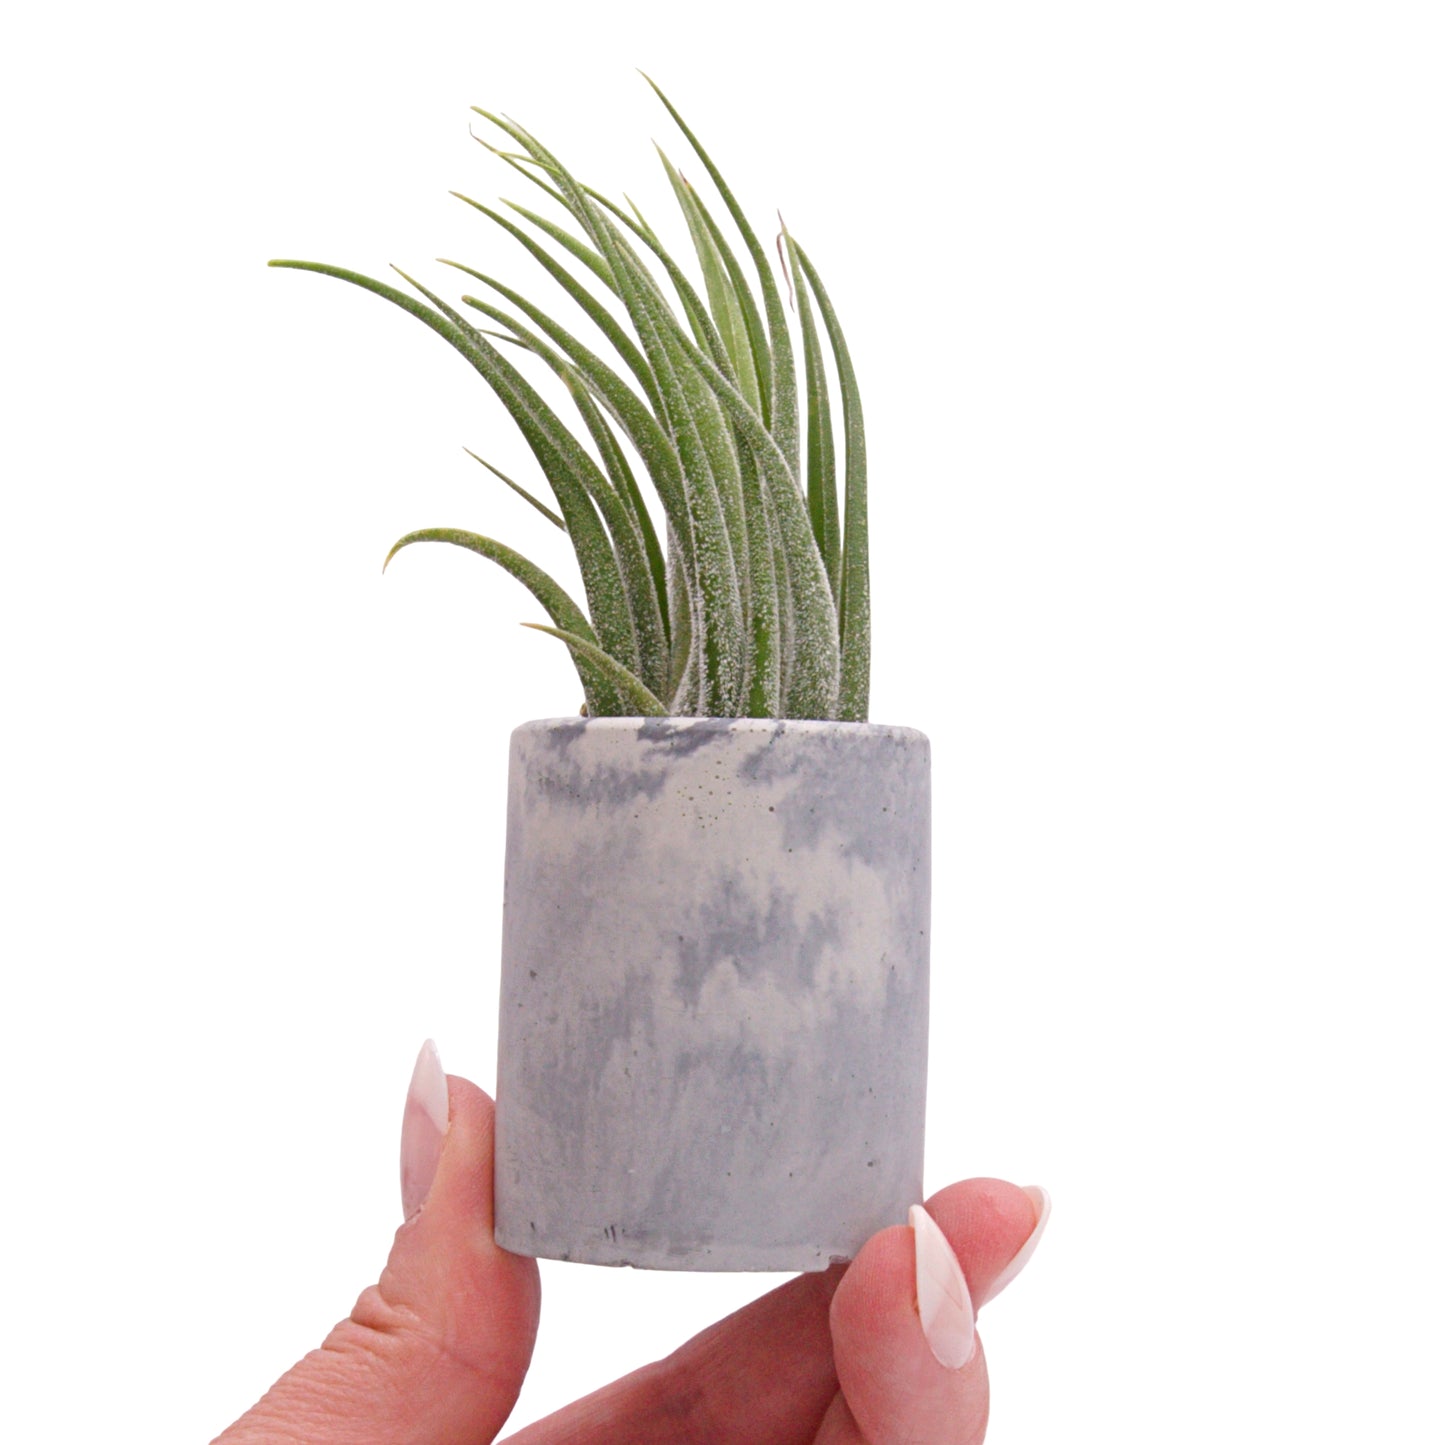 Black & grey marbled cement airplant pots